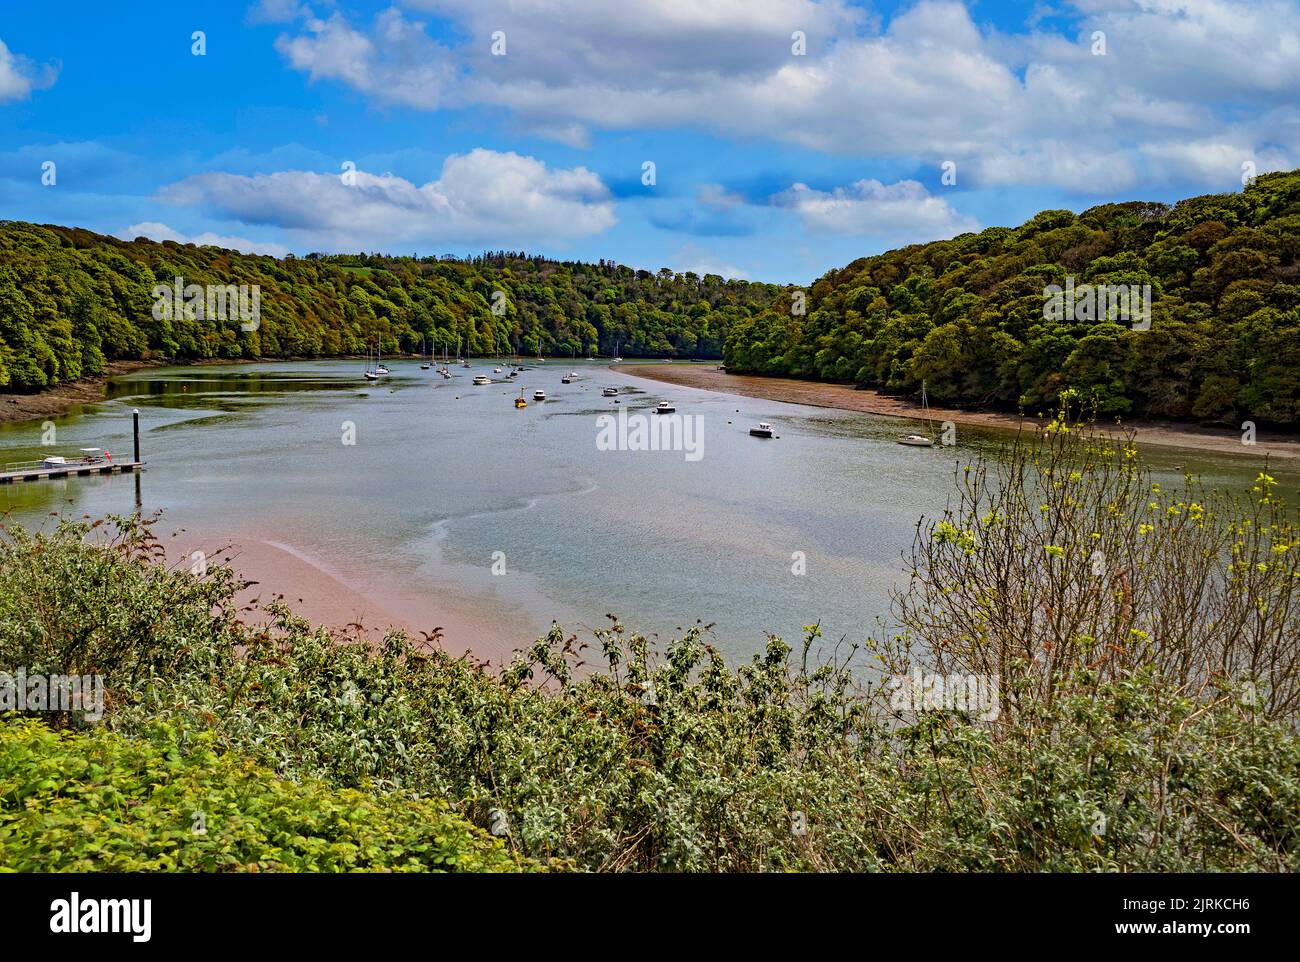 View of the river fal fom the village of malpas in truro cornwall england Stock Photo